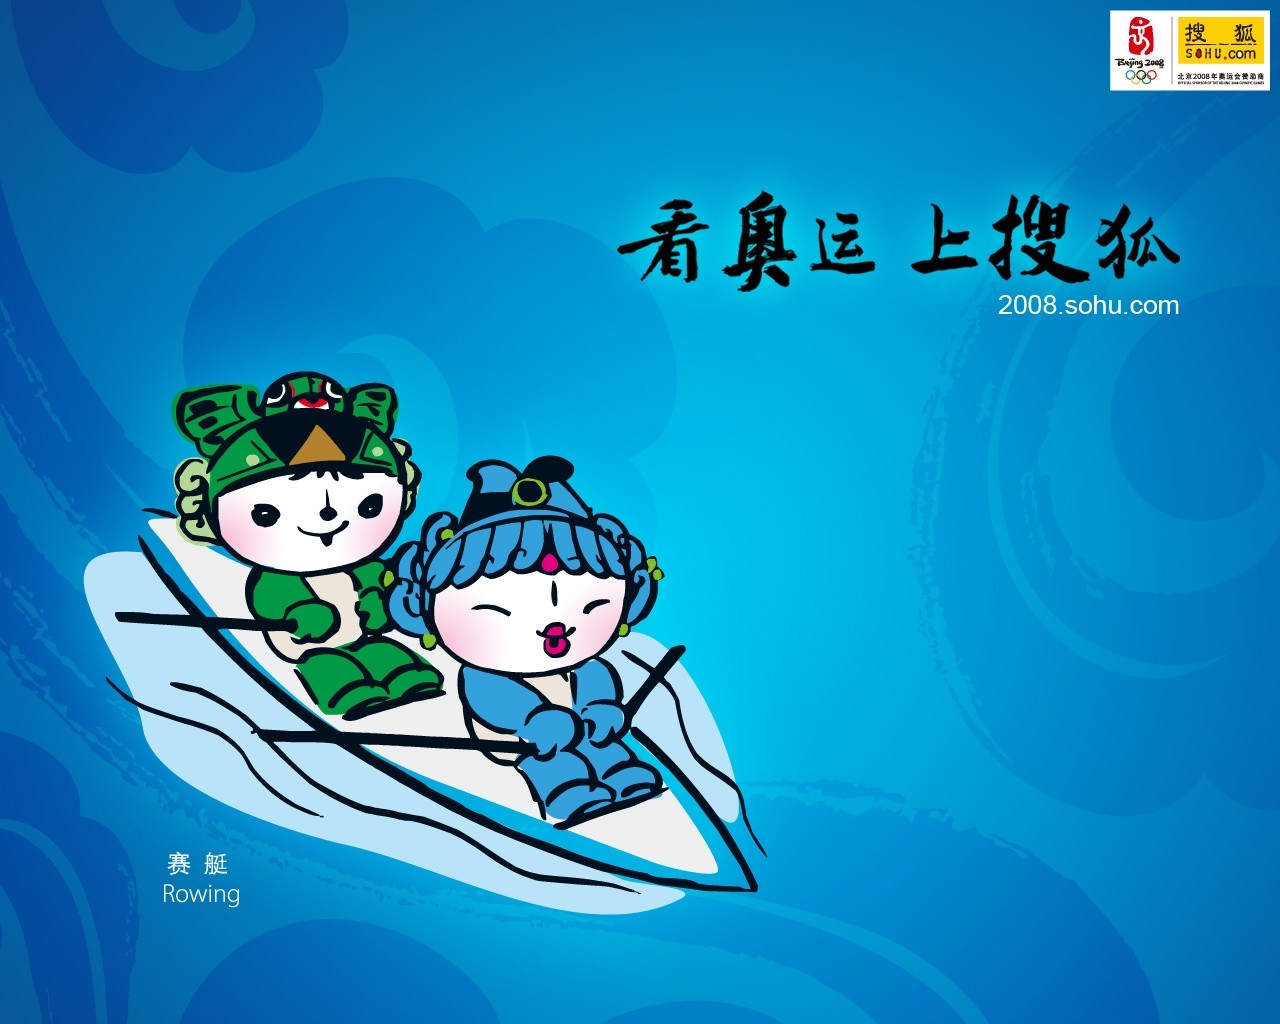 08 Olympic Games Fuwa Wallpapers #26 - 1280x1024